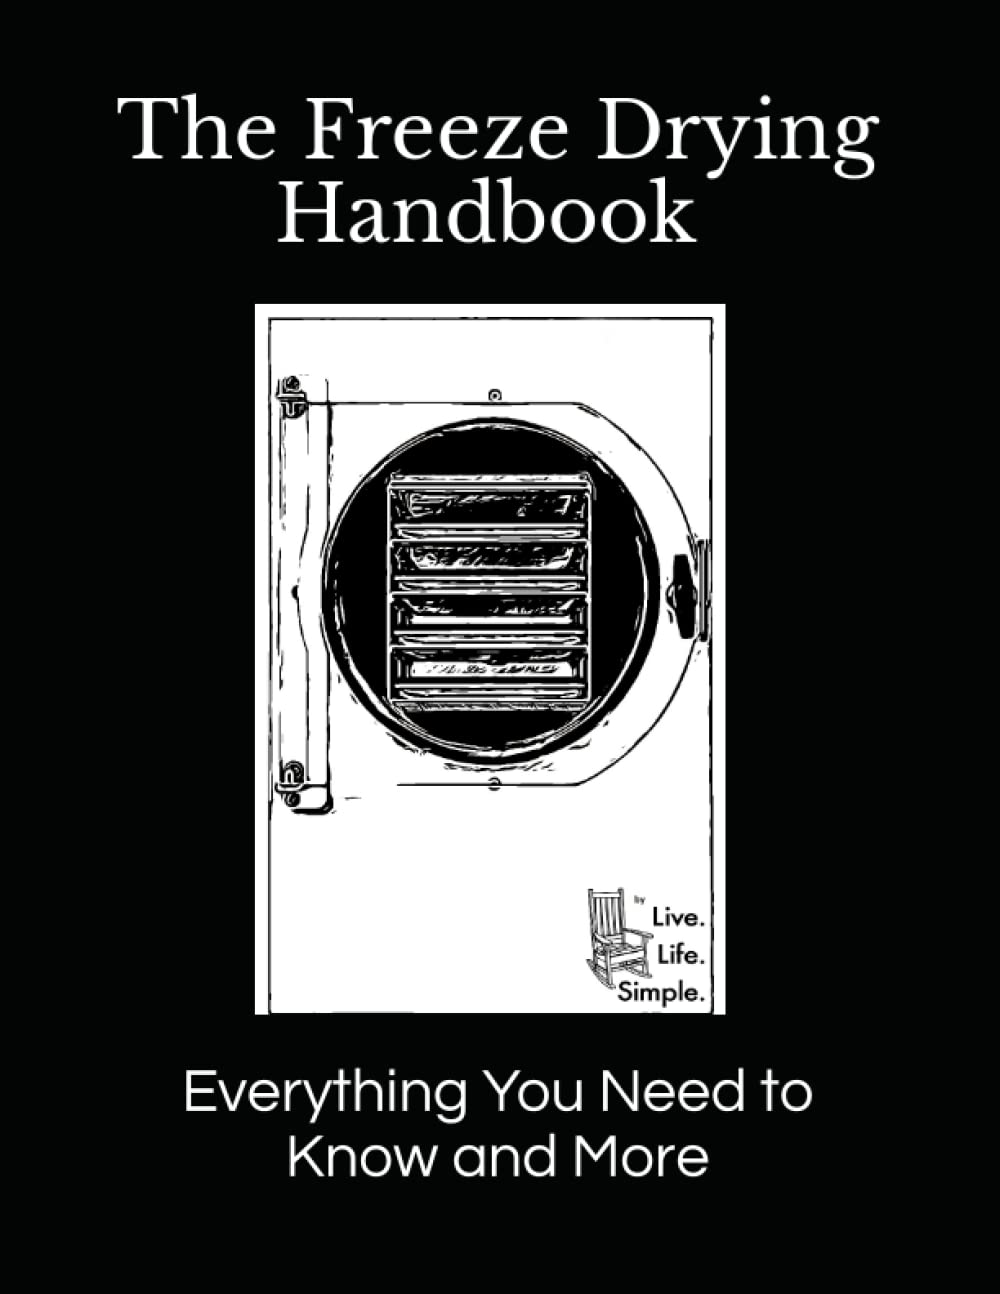 The Freeze Drying Handbook: Everything You Need to Know and More PDF Download